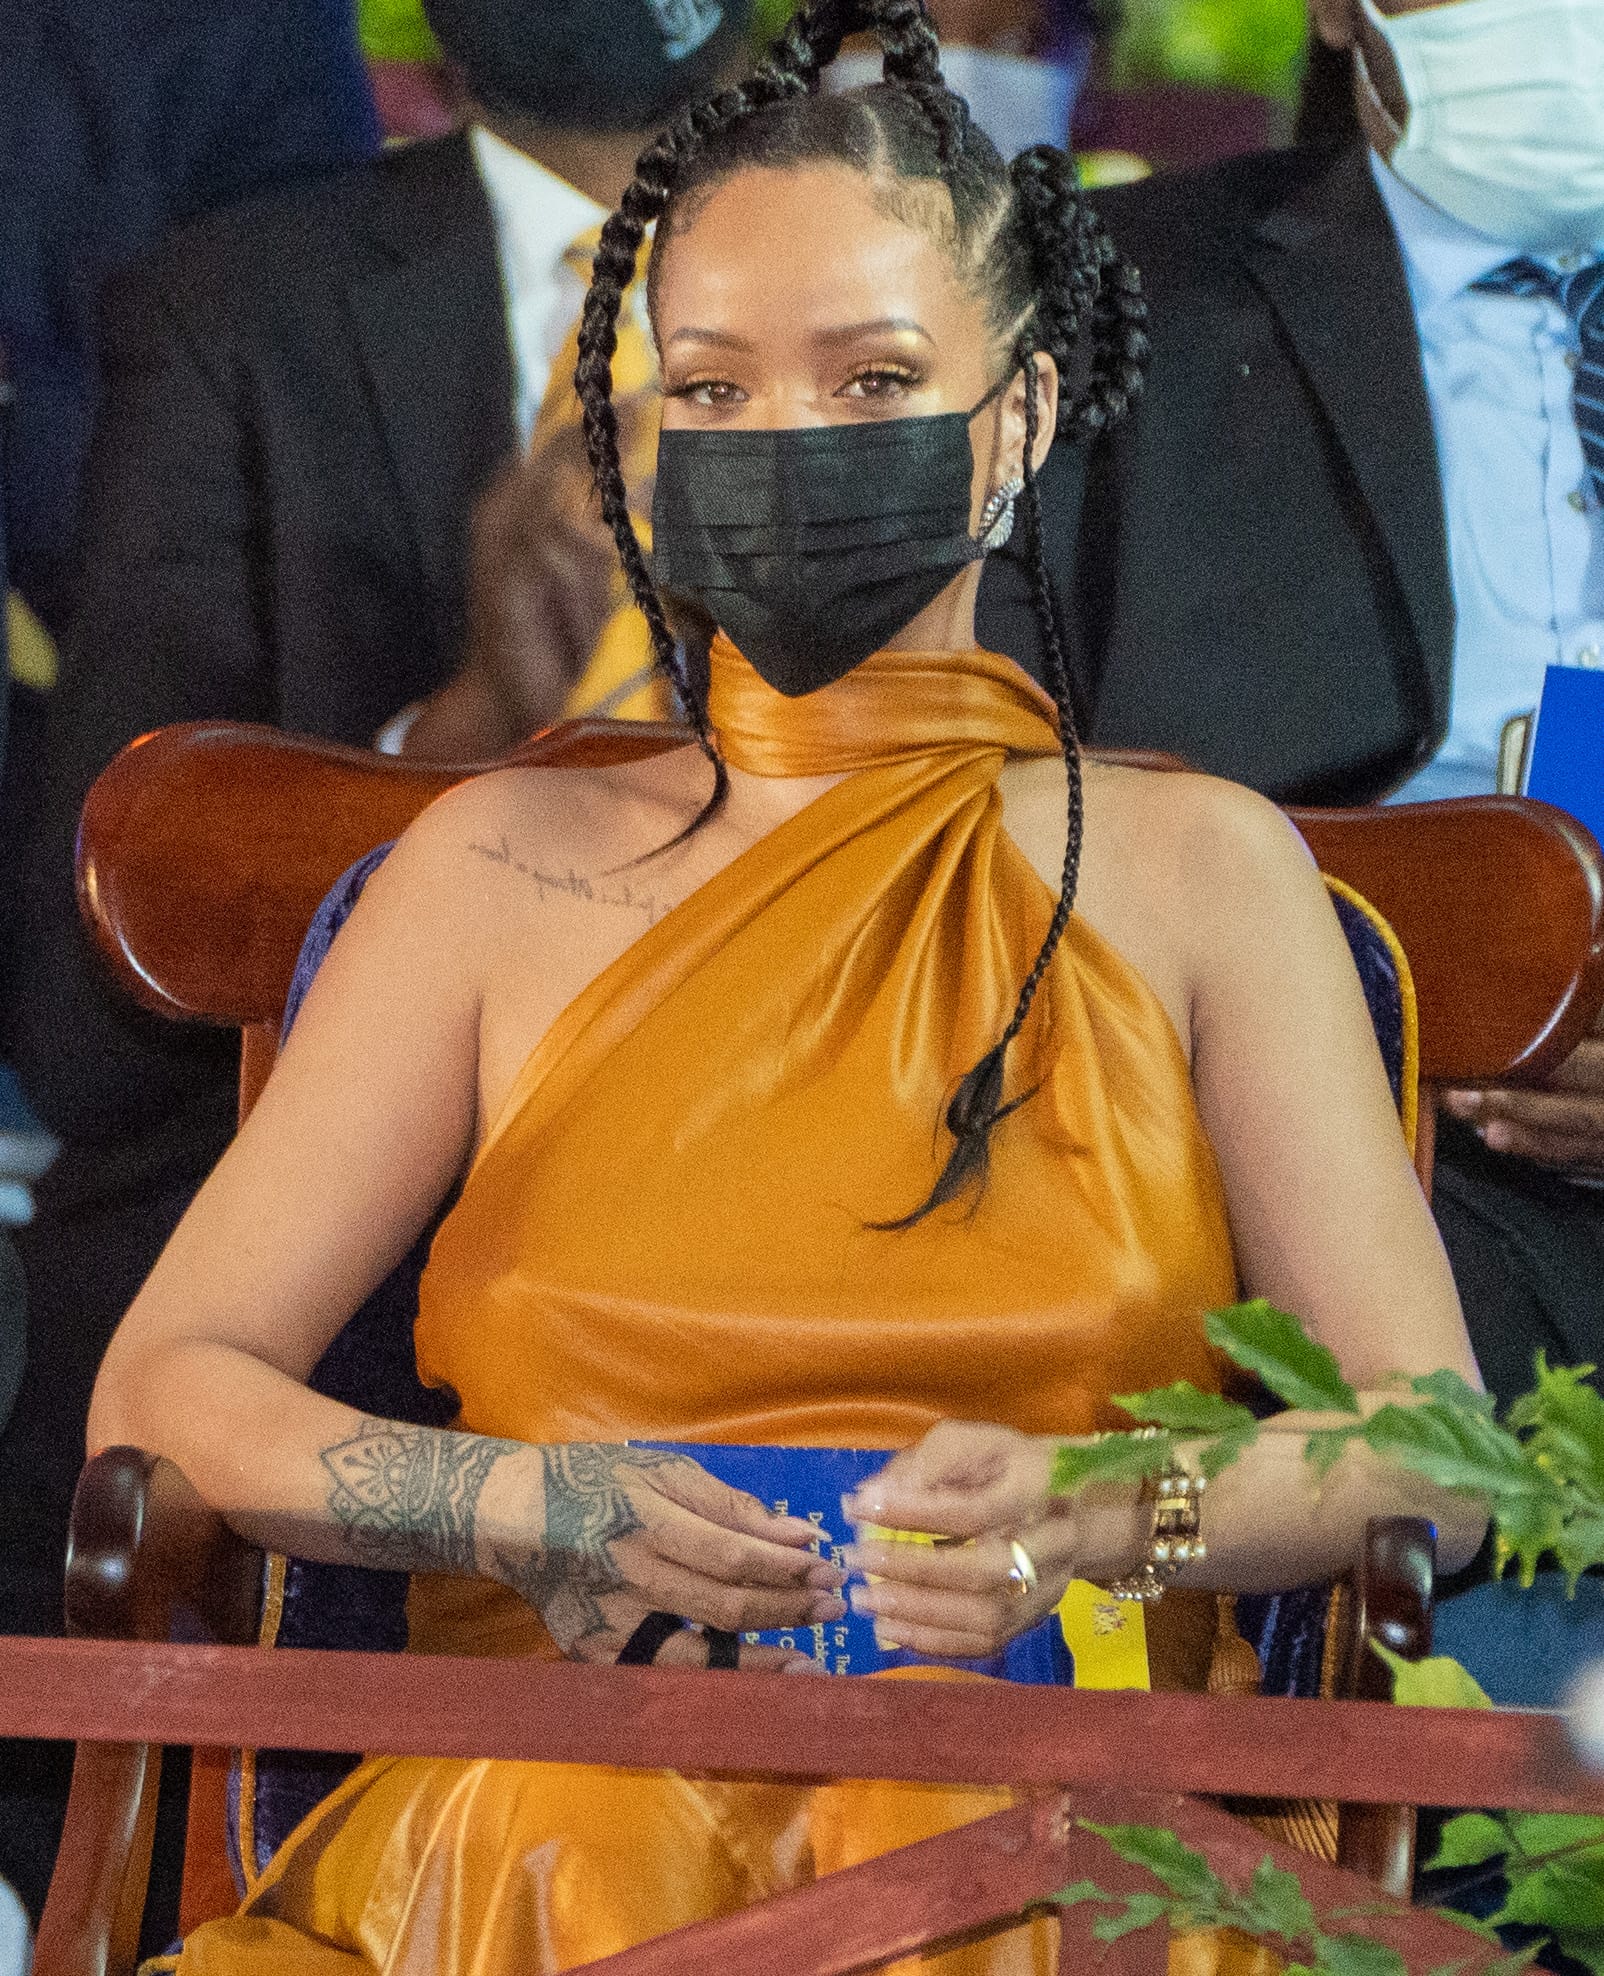 Rihanna wears her hair in braids with minimal makeup accentuating her eyes